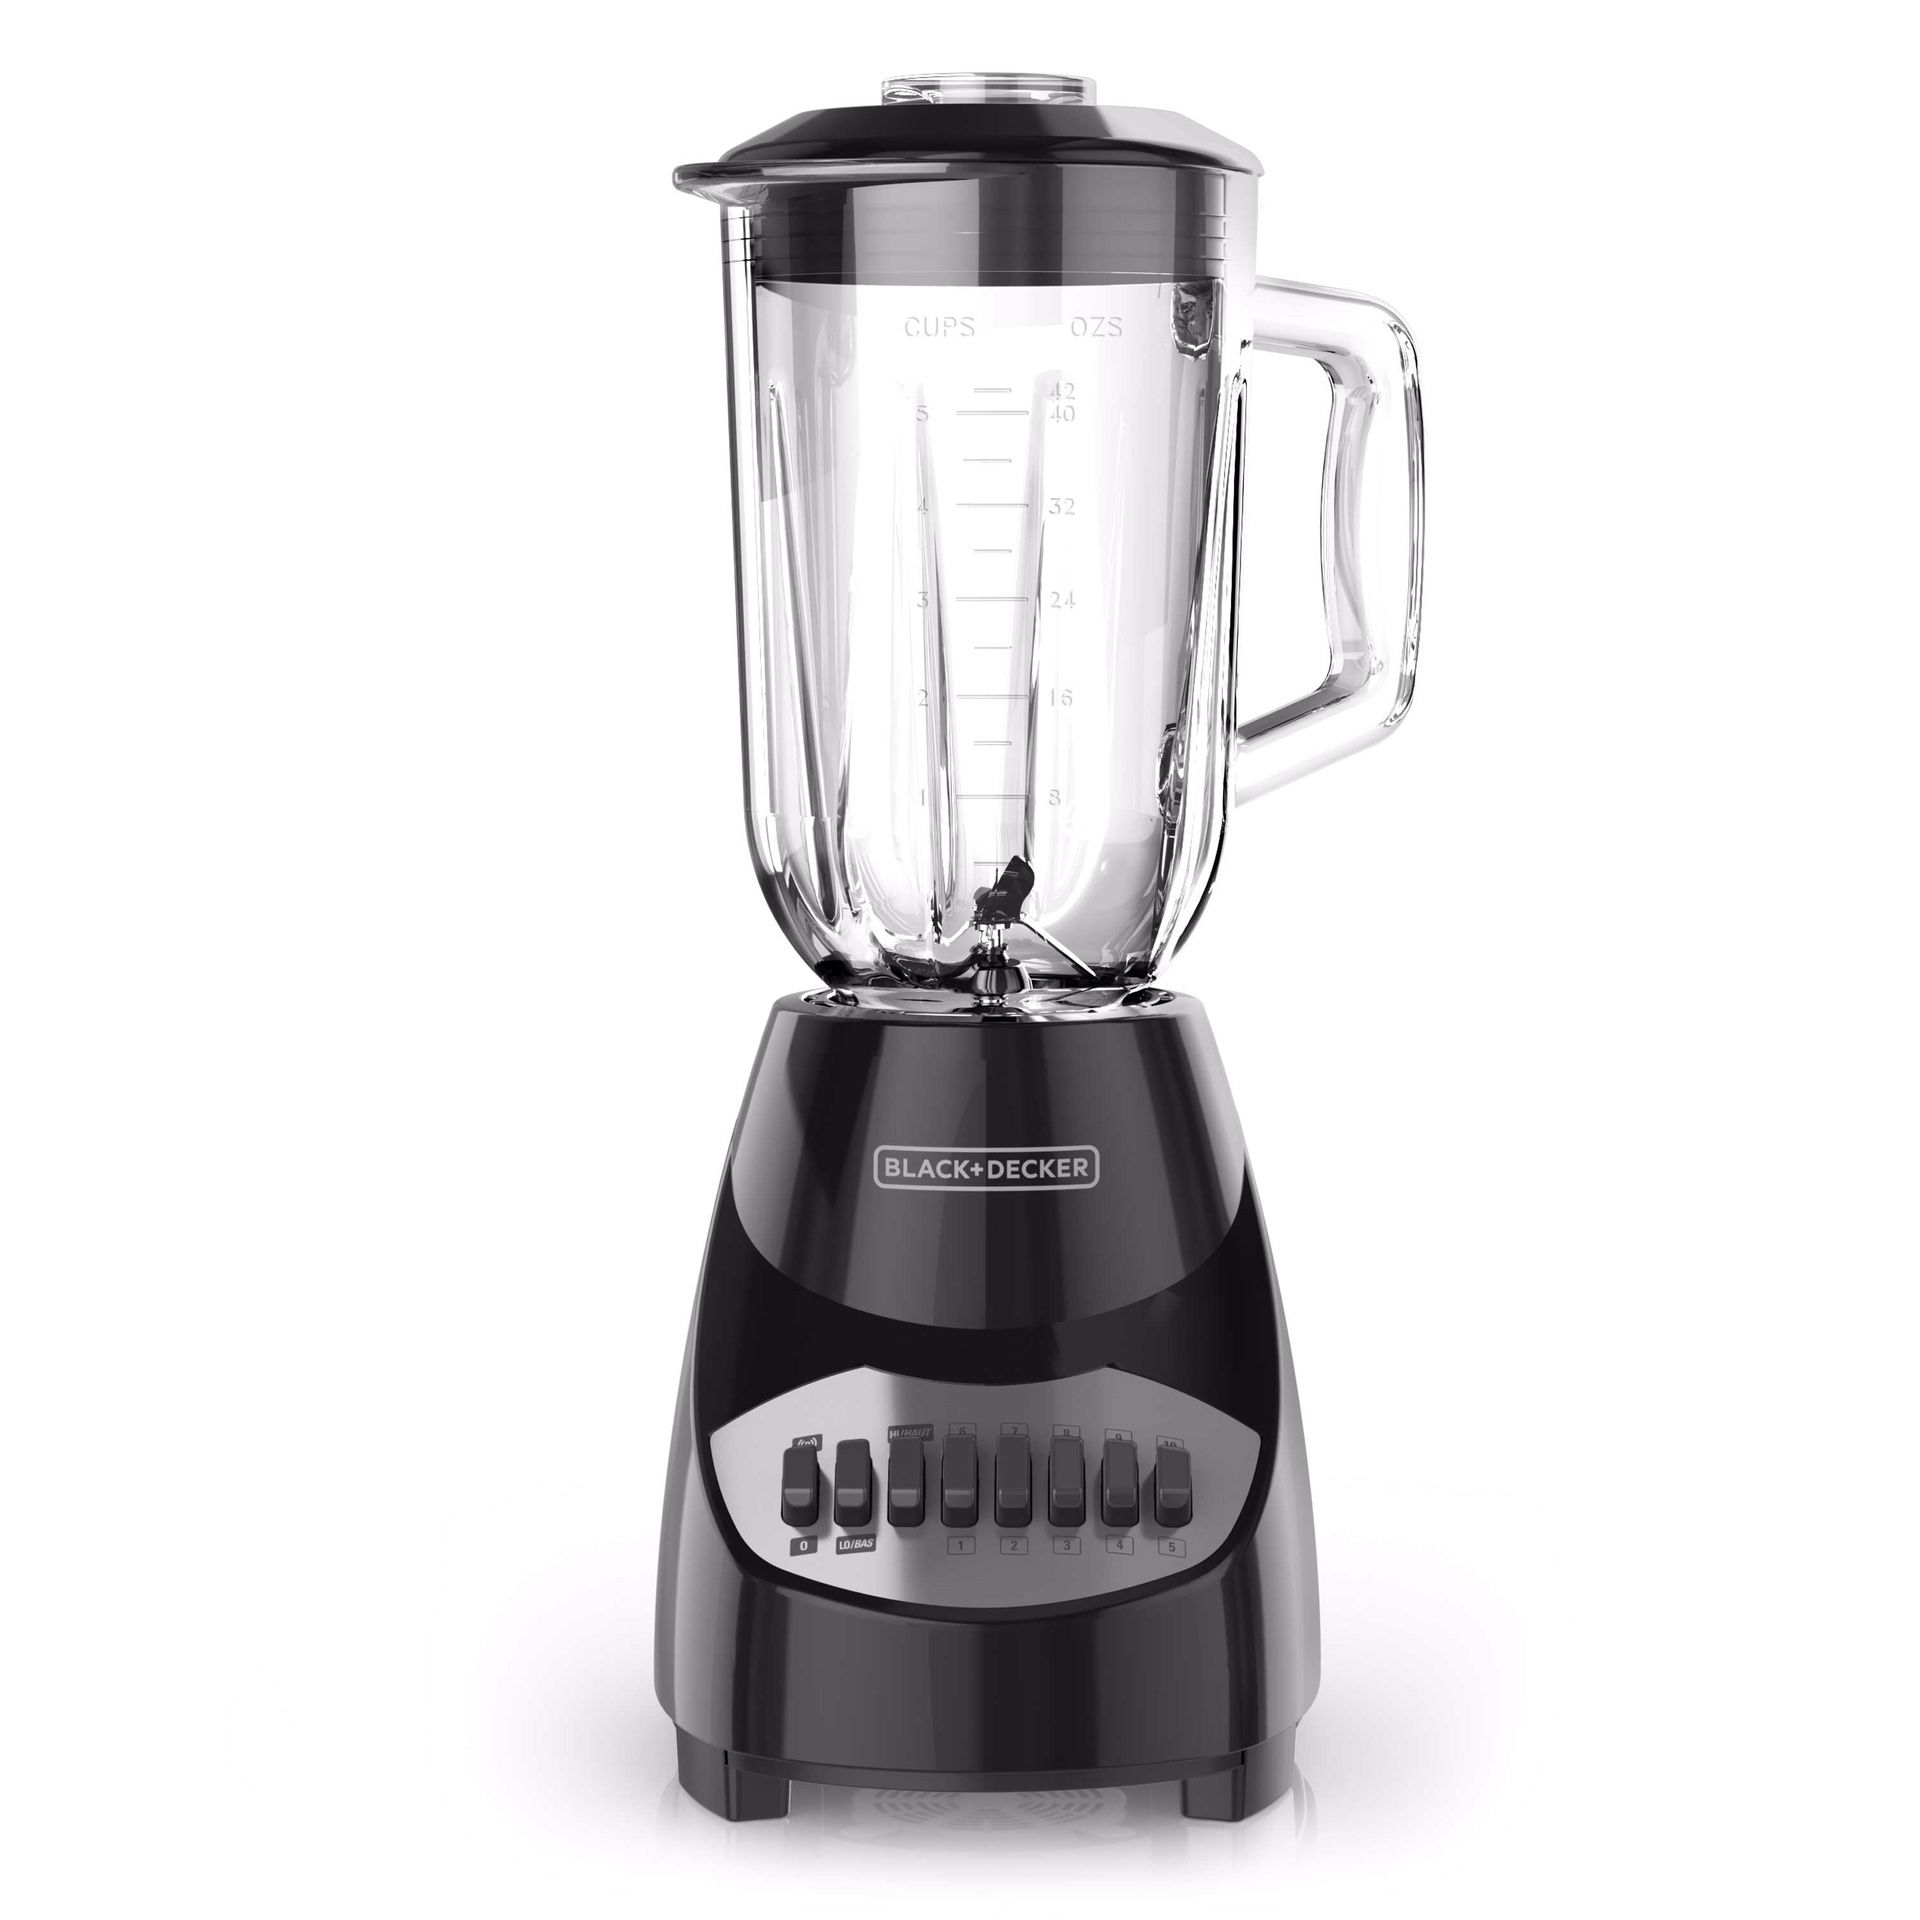 Black and decker mixer and grinder 6 cups